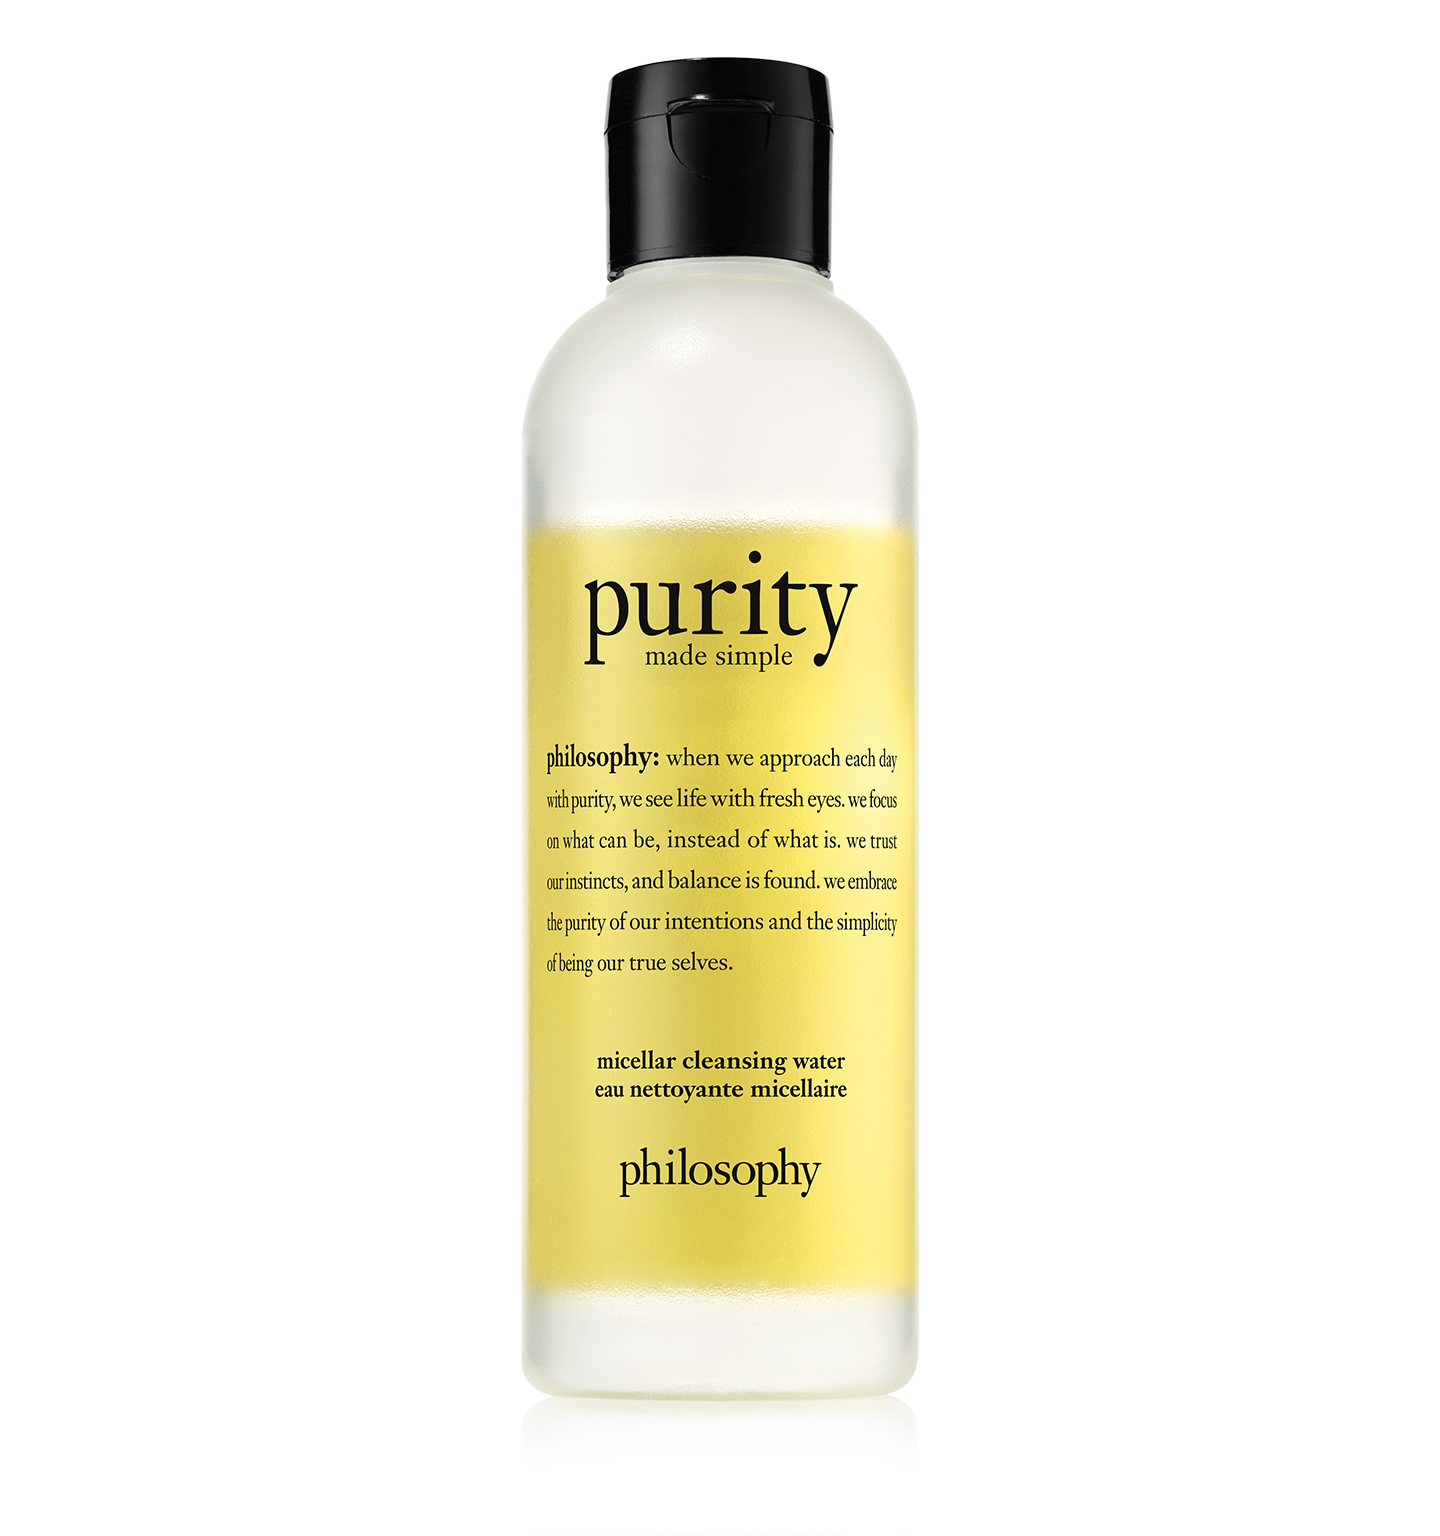 philosophy purity made simple micellar cleansing water bottle